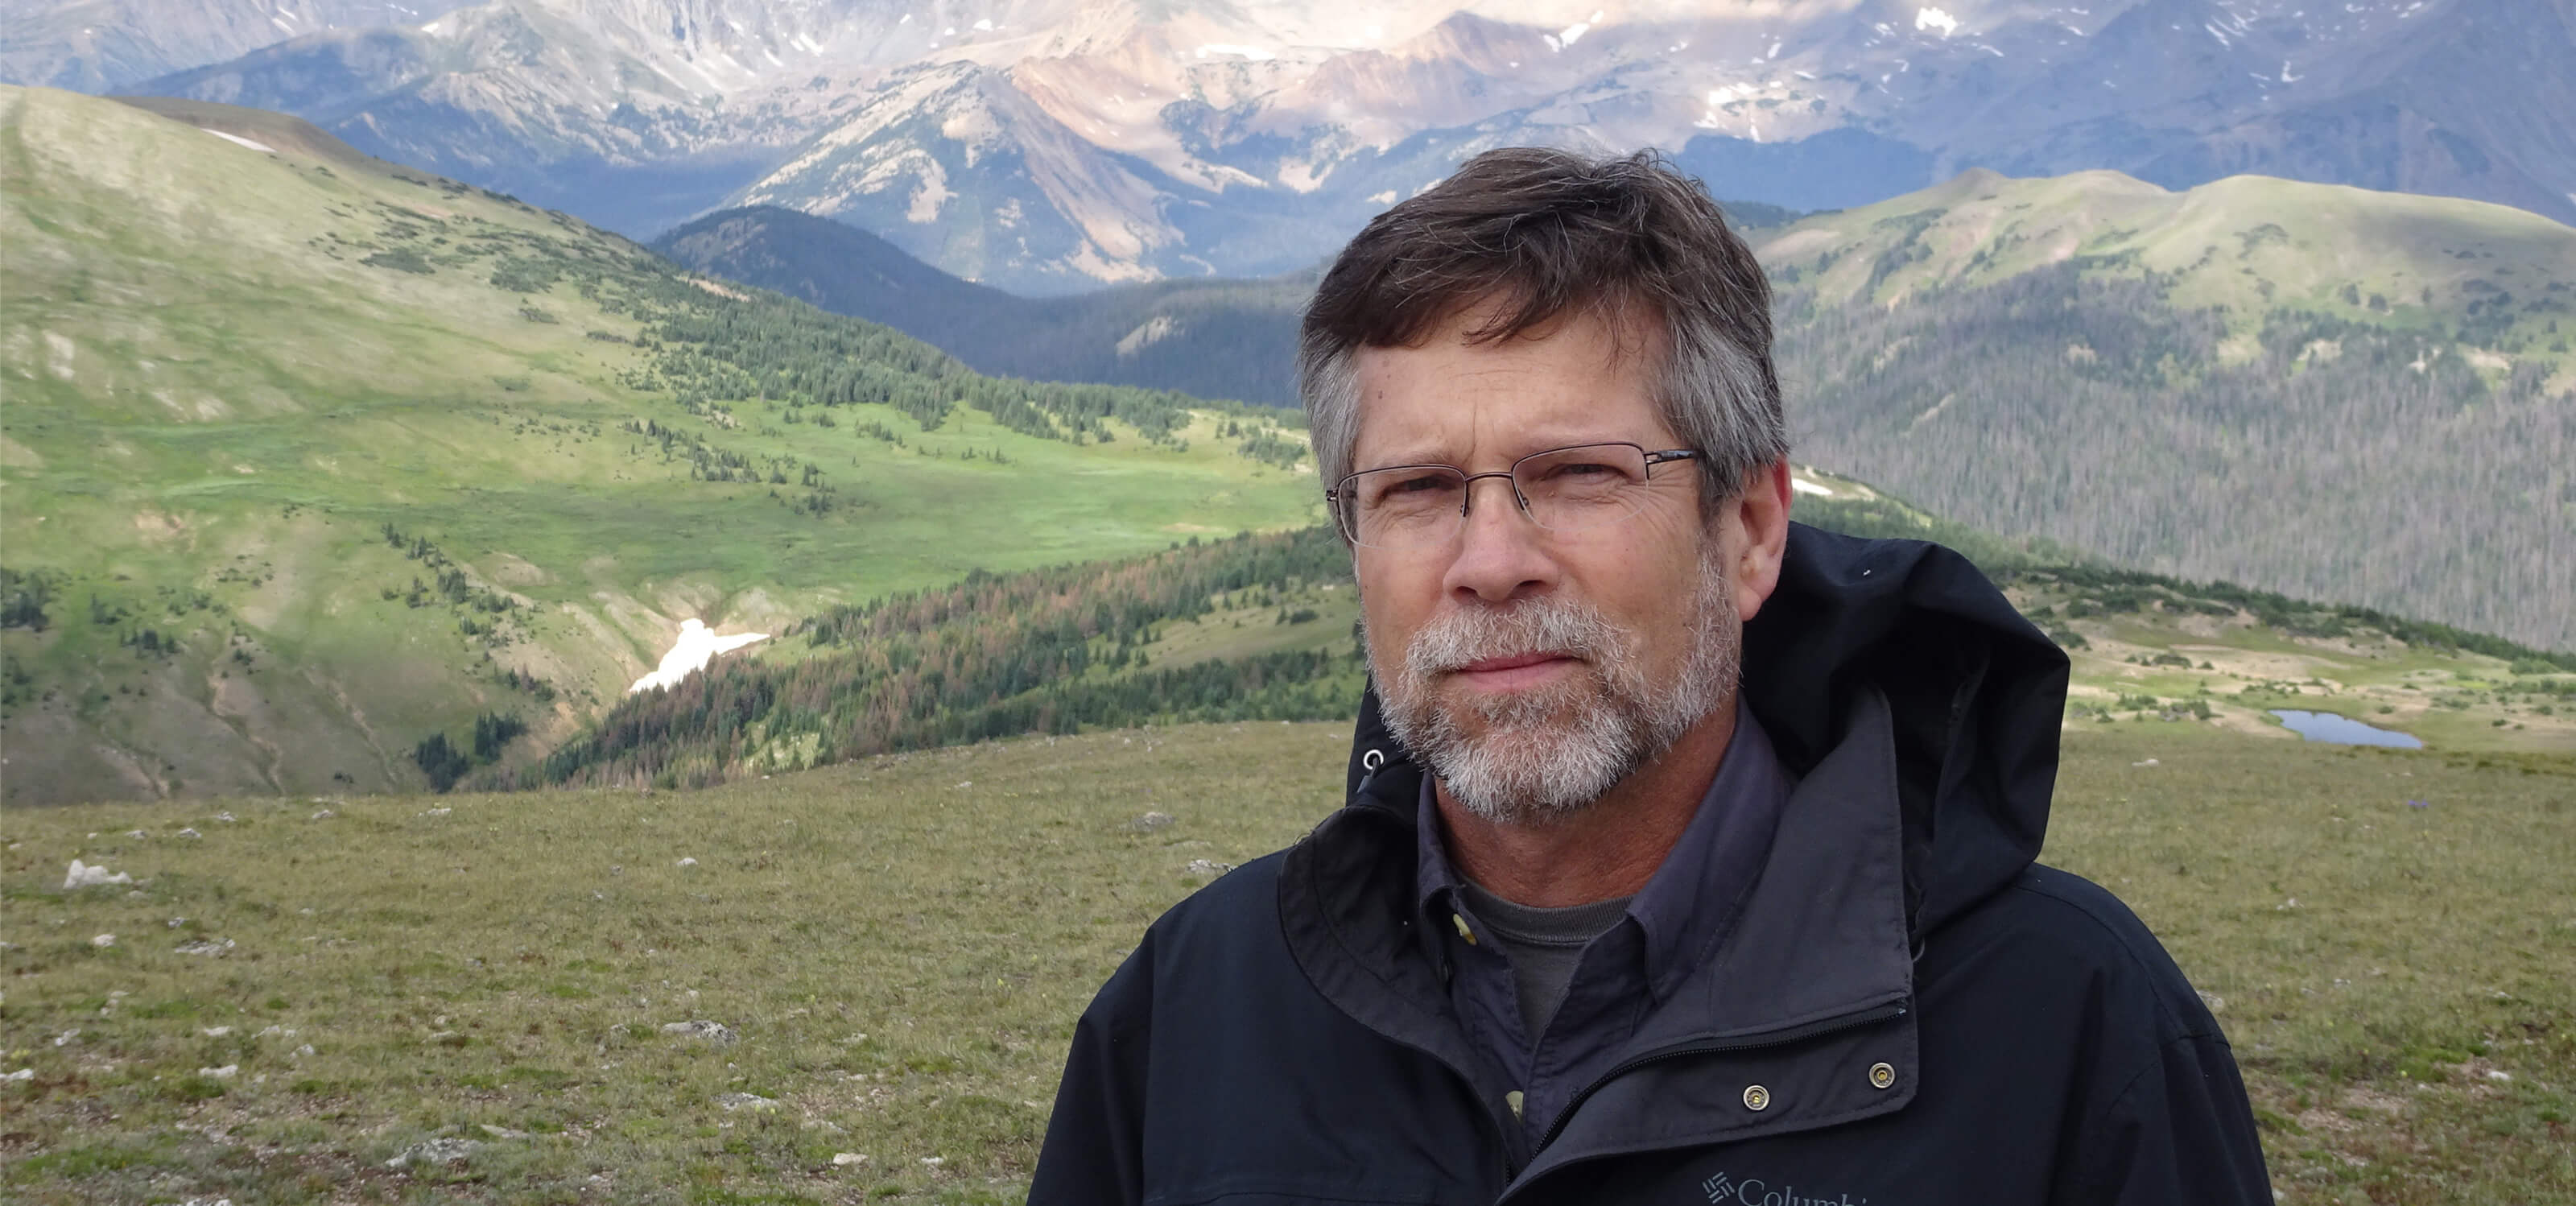 Professor James Peet stands in front of a vast valley and mountain range.